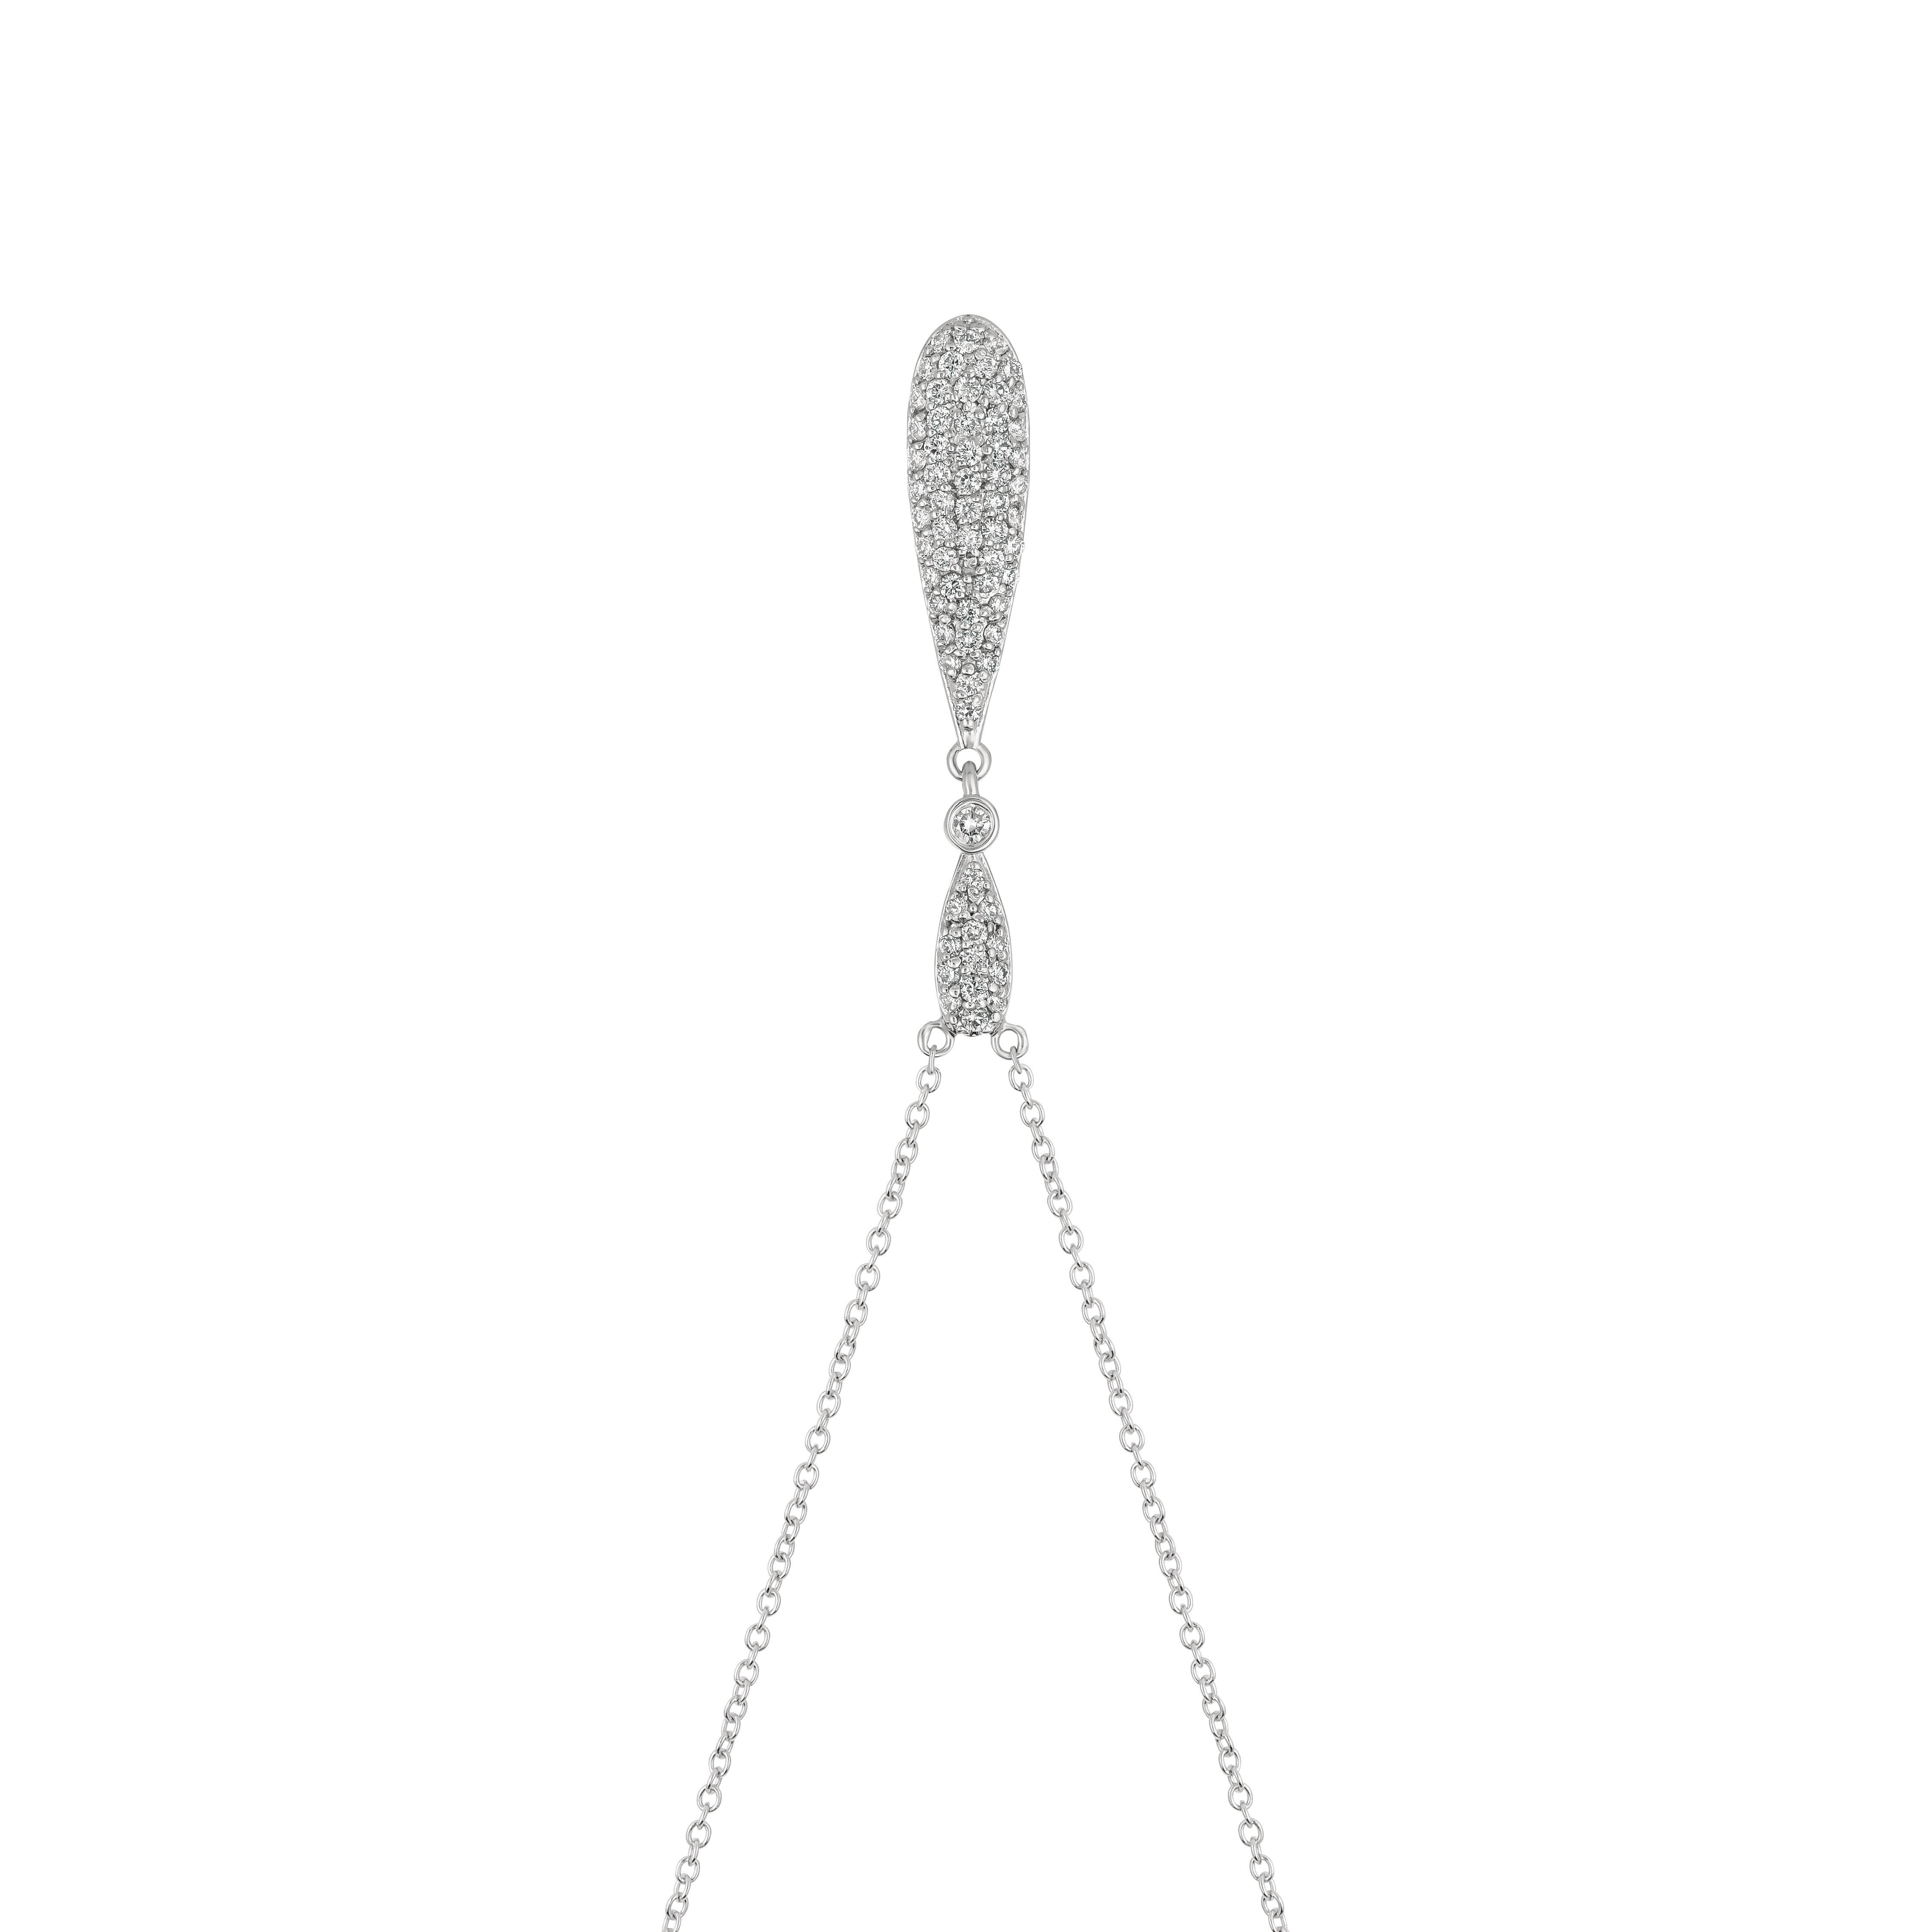 0.60 Carat Natural Diamond Drop Necklace 14K White Gold G SI 18 inches chain

100% Natural Diamonds, Not Enhanced in any way Round Cut Diamond Necklace
0.60CT
G-H
SI
14K White Gold, Pave style , 3.2 grams
1 3/8 inch in height, 1/4 inch in width
1